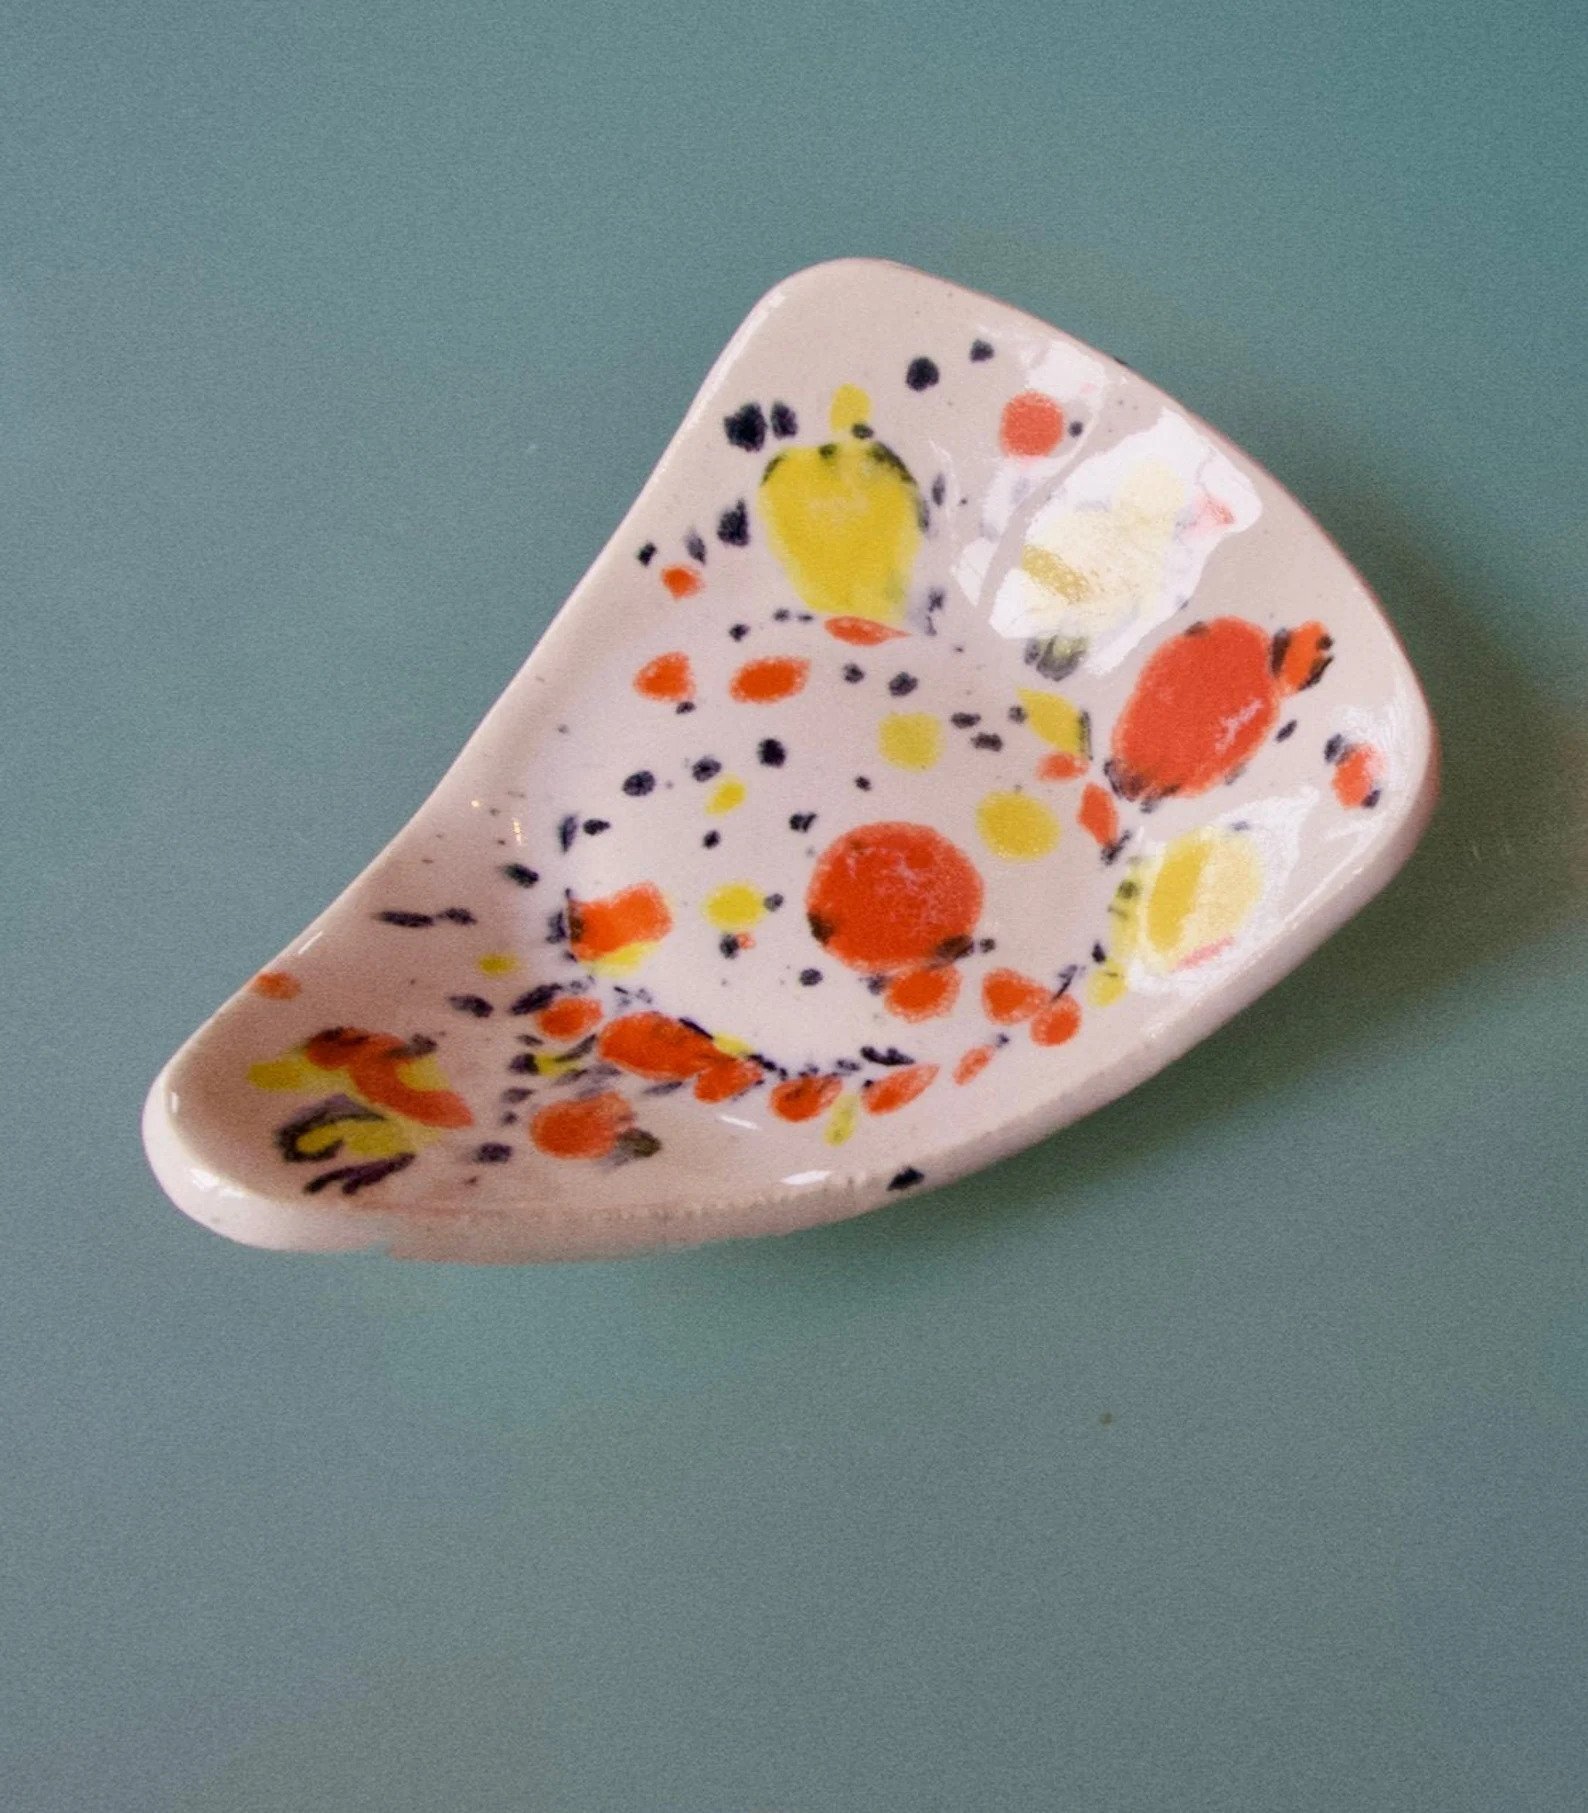 candy corn spoon rest by Artis4Everyone.jpg